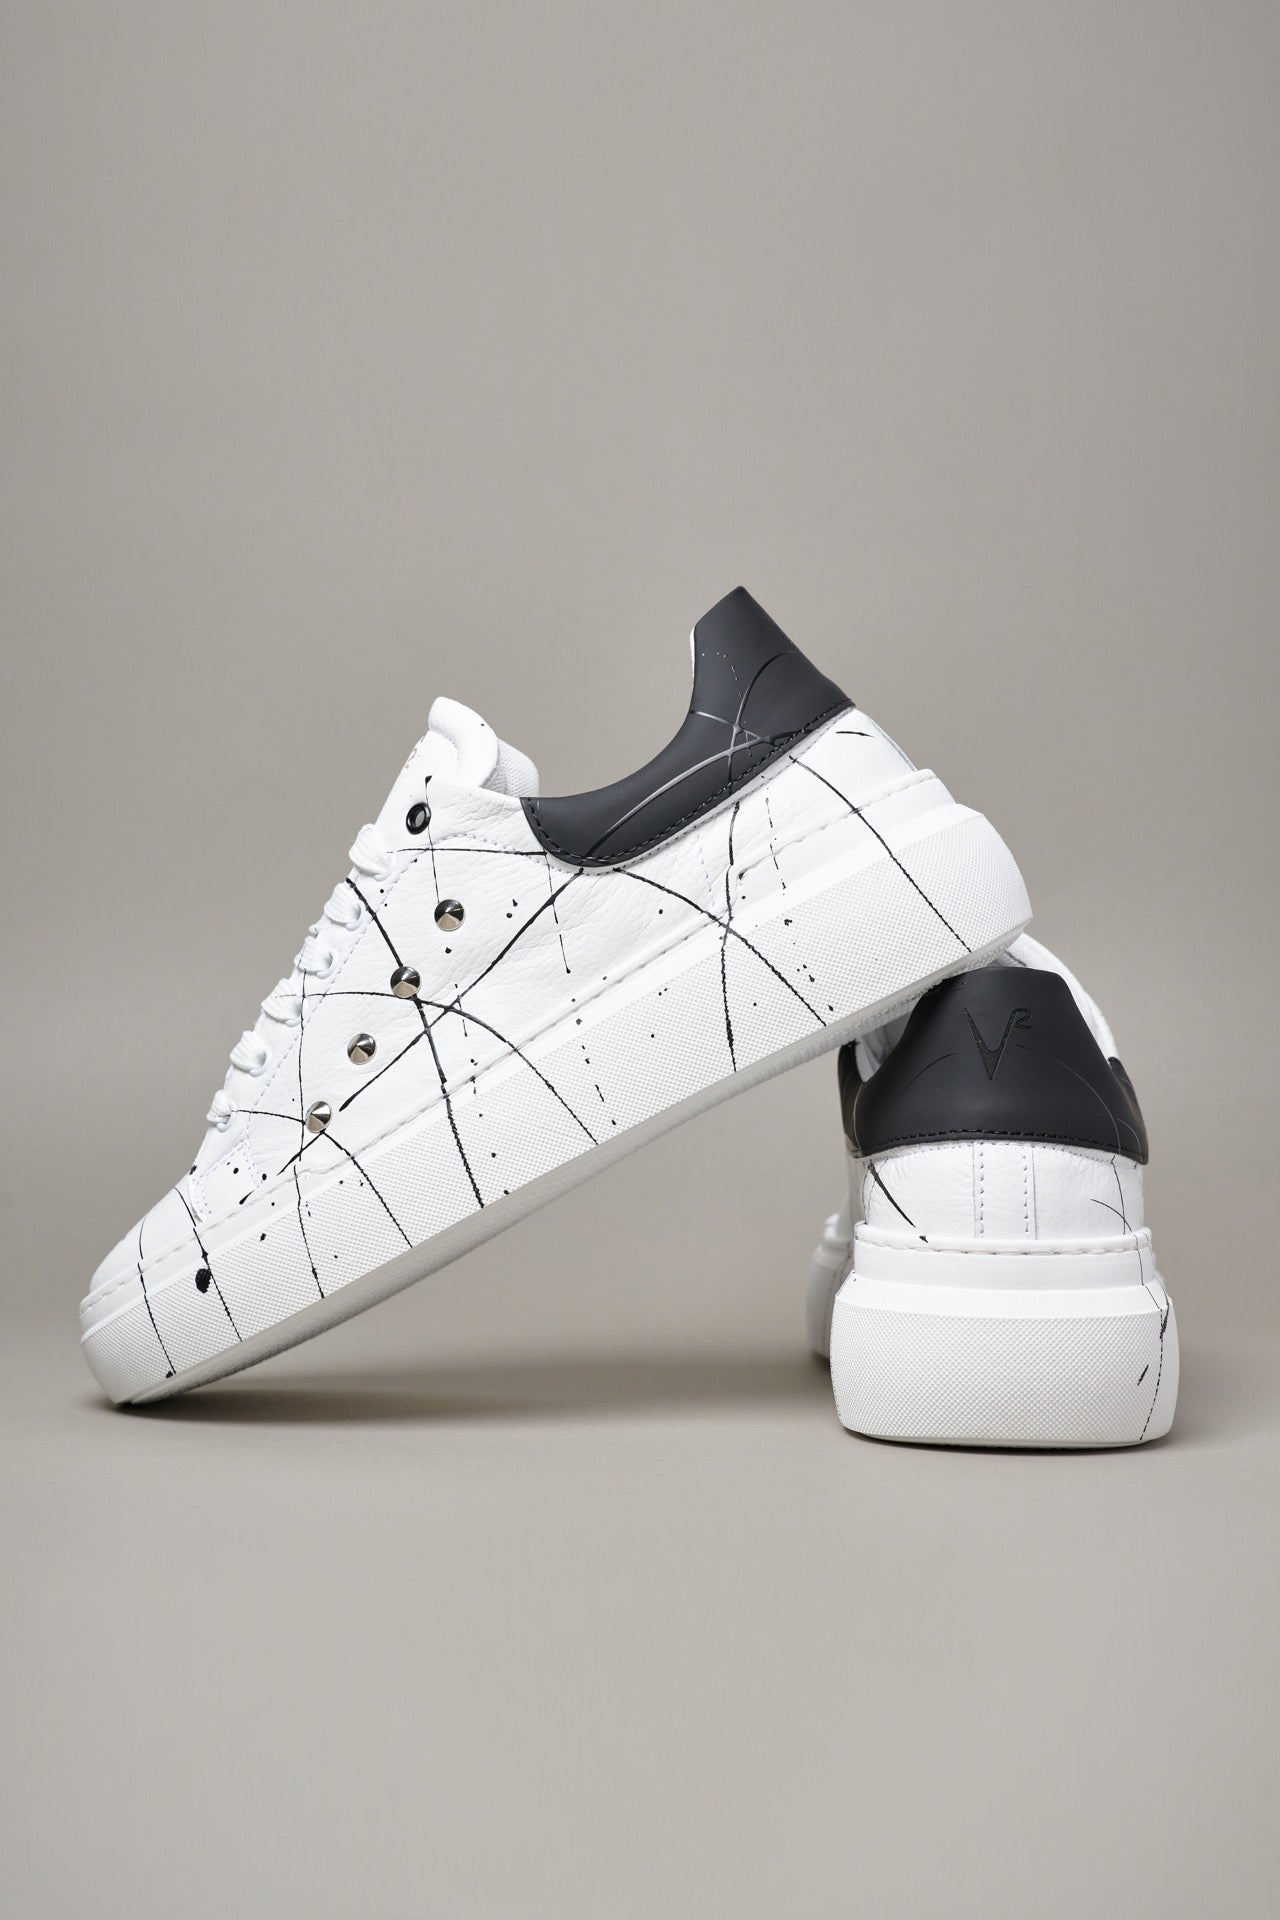 HAMMER - High sole sneakers in textured leather with Black back with studs and splashes of paint